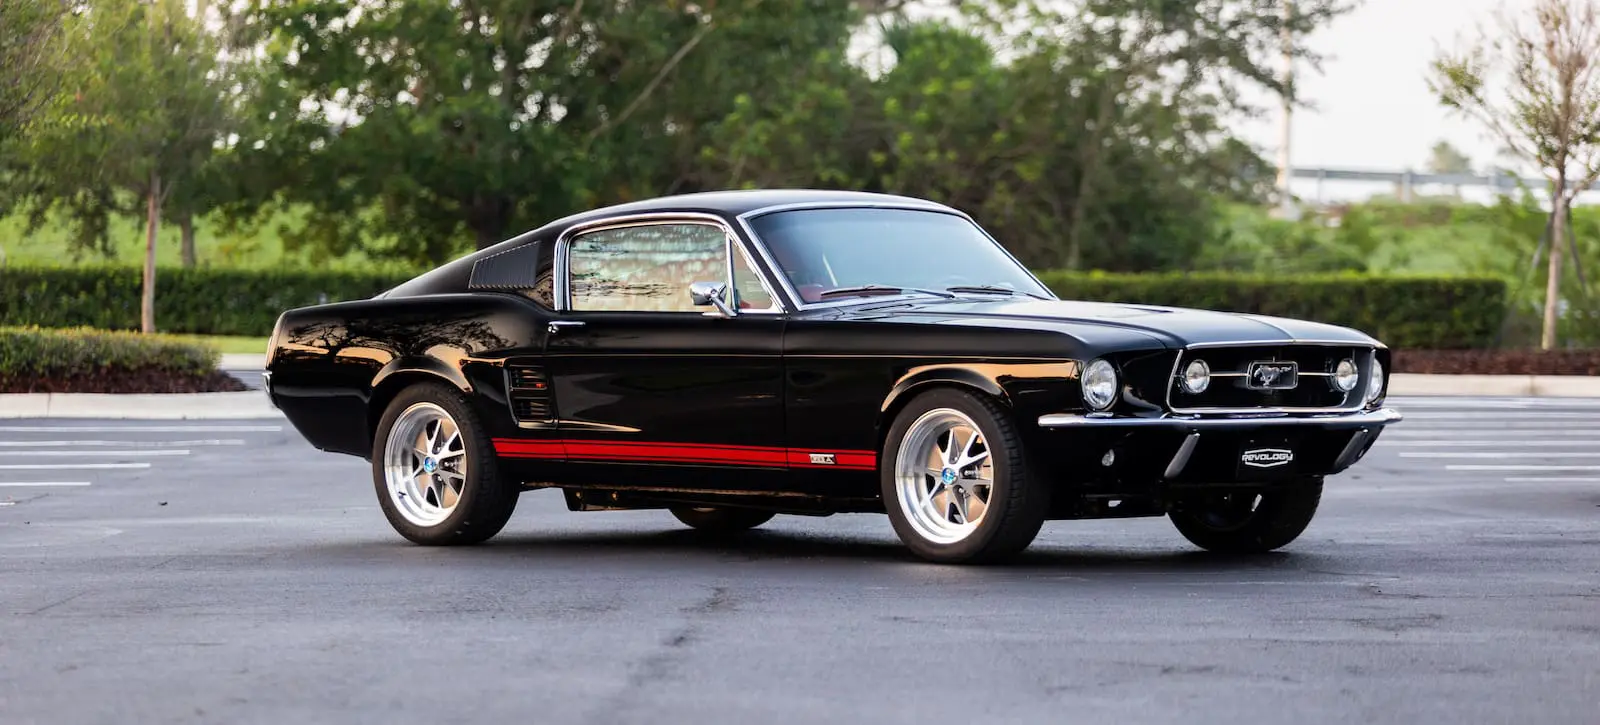 A rare view of a parked black 1967 Mustang GT / GTA 2+2 Fastback in a parking lot.